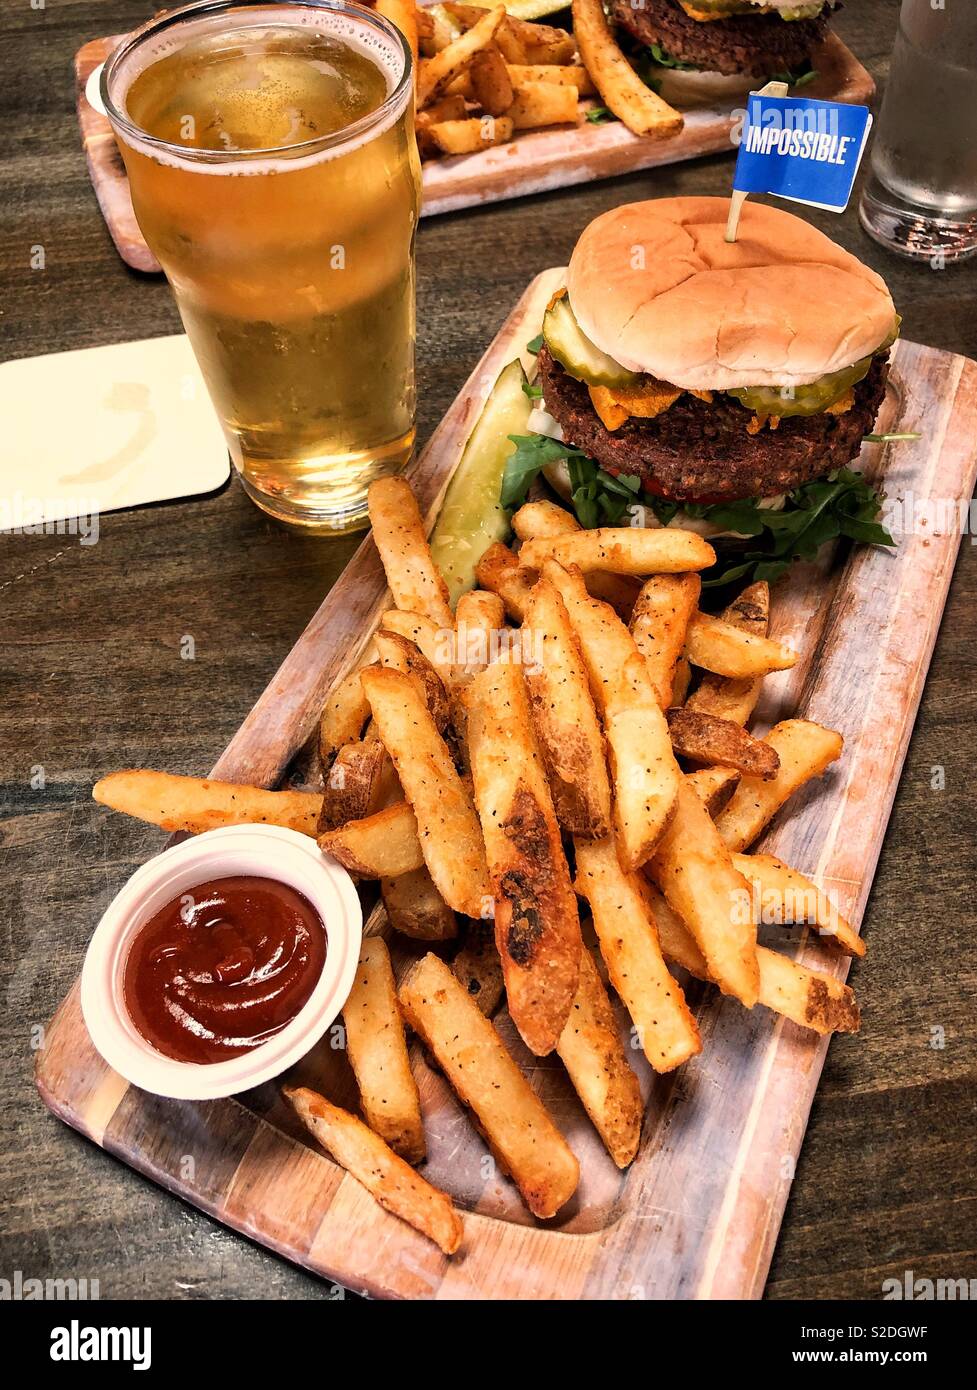 Famous vegan impossible burger with fries and cider Stock Photo